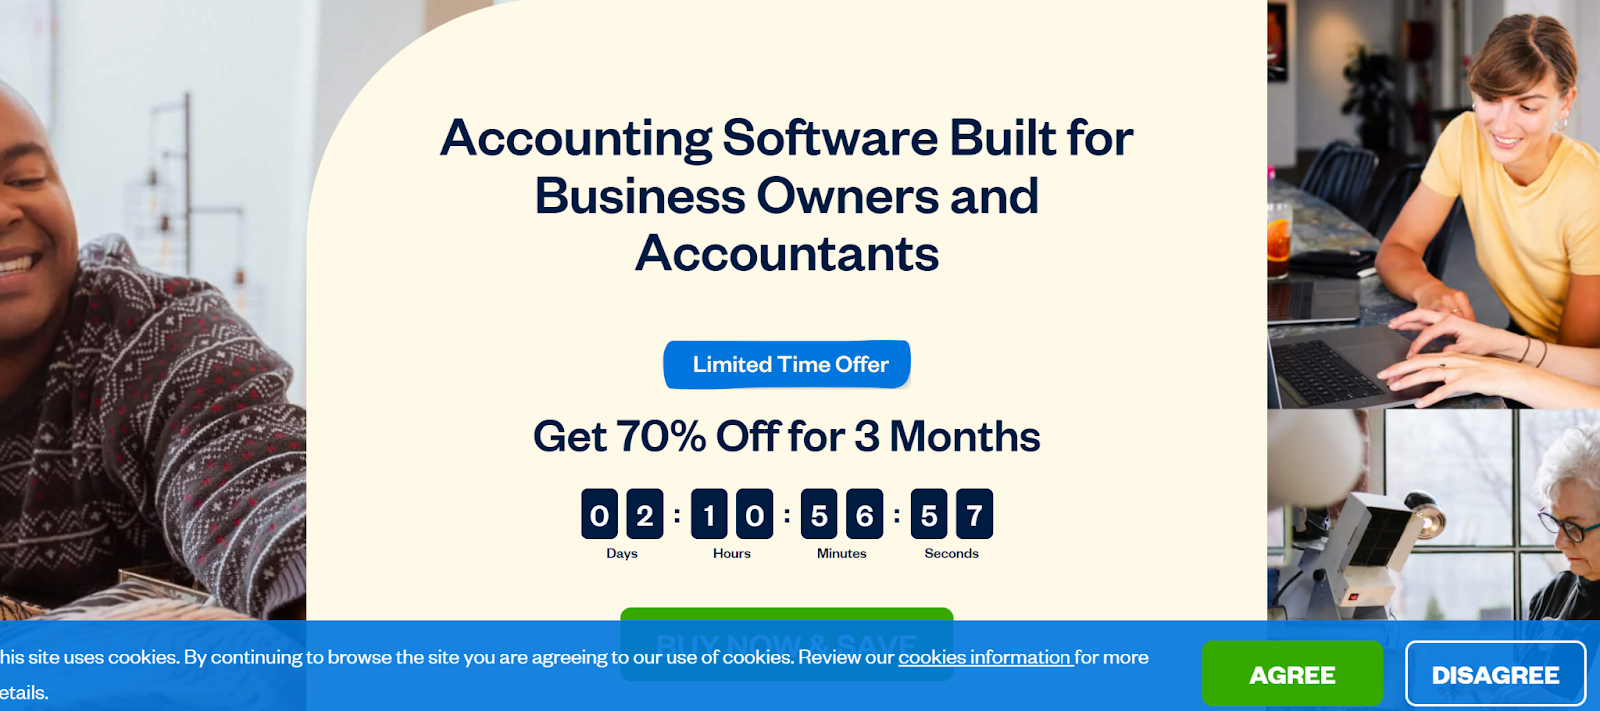 Best Accounting Software for Amazon Sellers